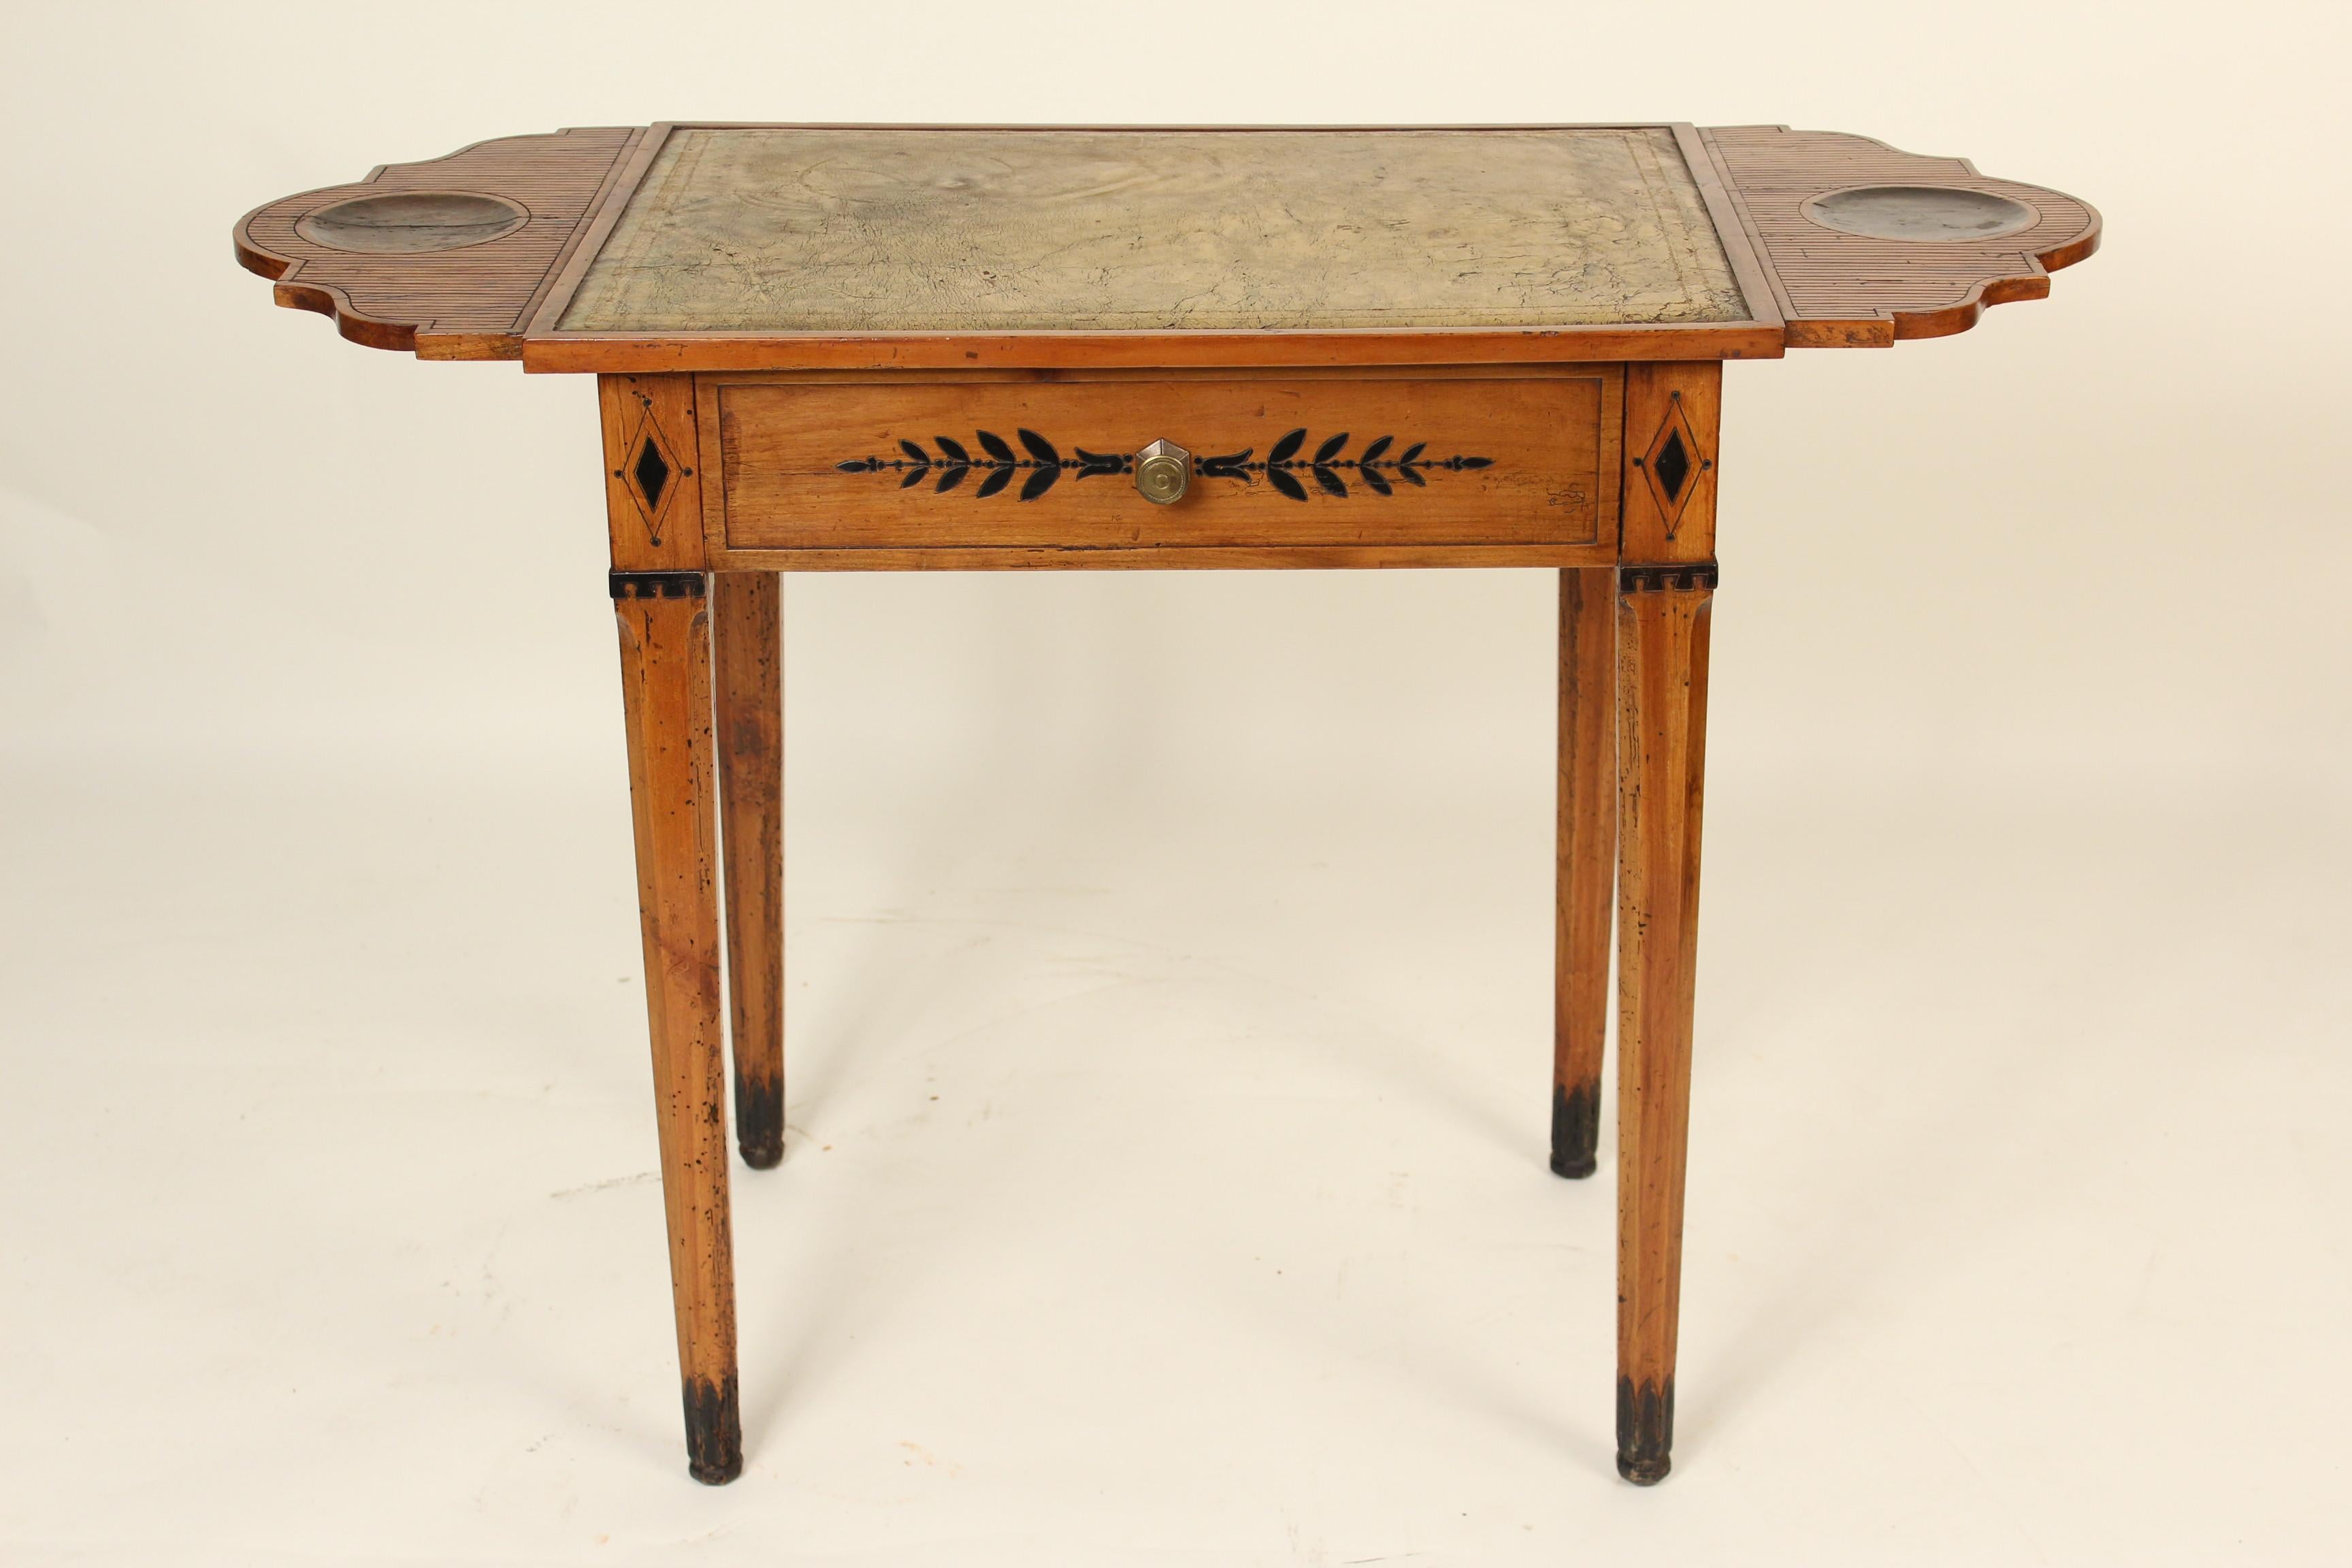 Directoire fruit wood writing table, with engraved and ebonized decorations and a tooled leather top, circa 1800. The top is stationary, the ends do not fold down.